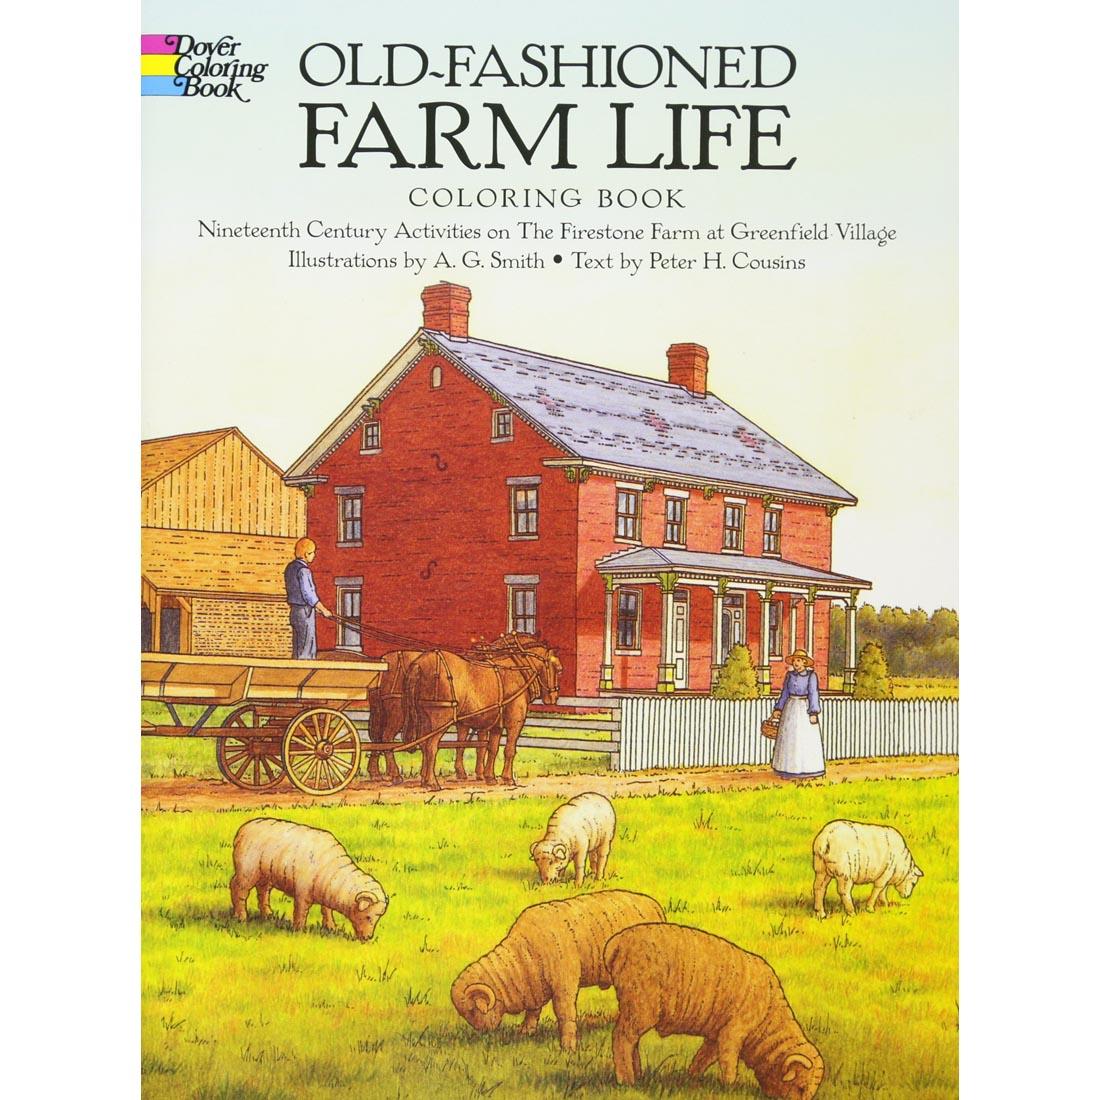 Old-Fashioned Farm Life Coloring Book by Dover